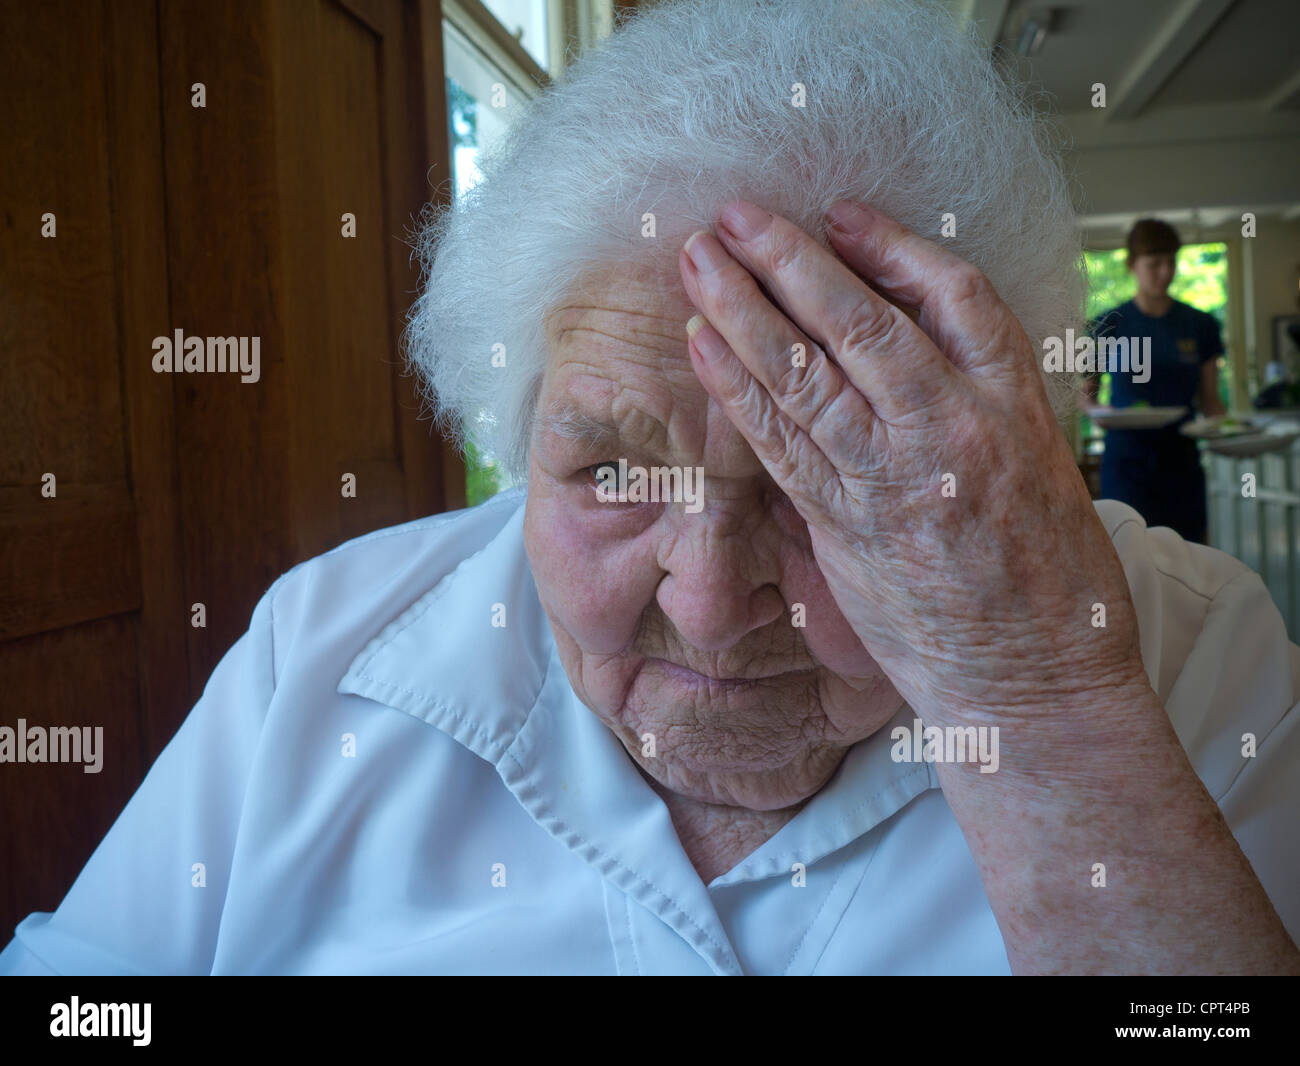 ELDERLY OLD MEALS CARE ROOM FOOD Apprehensive sad worried vulnerable senior elderly old age lady in large dining room old people’s home care facility Stock Photo